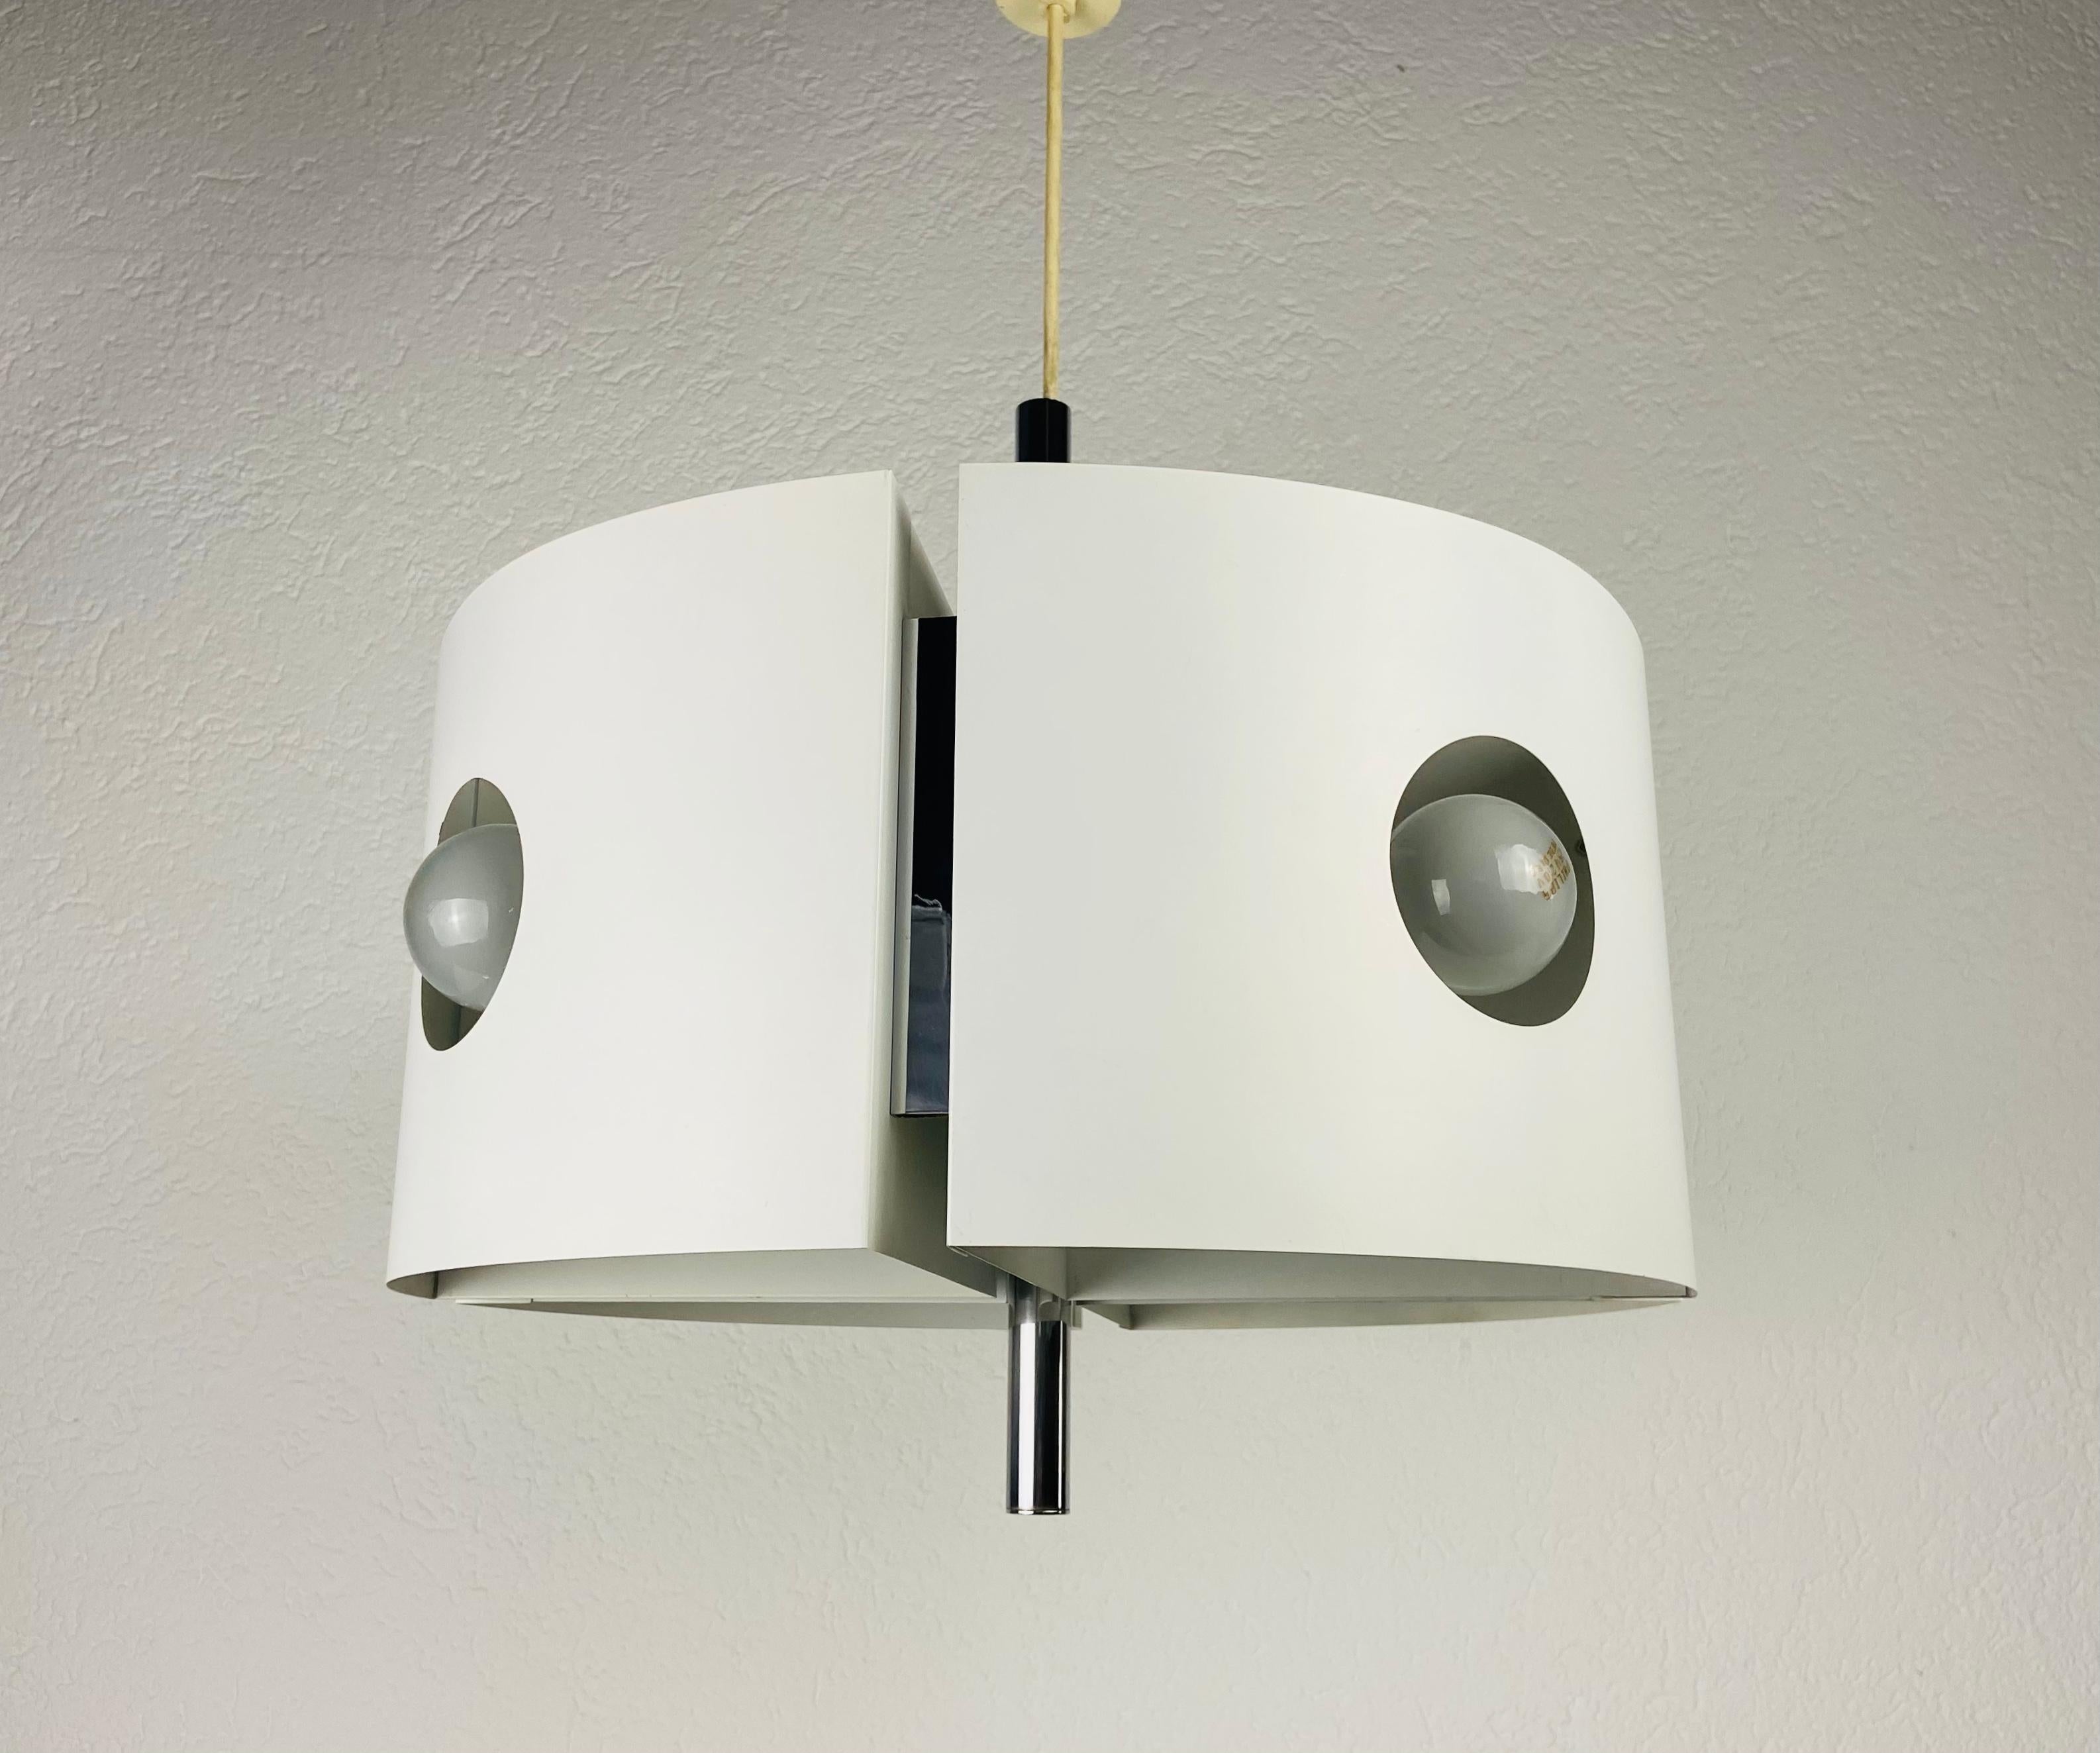 Very rare Space Age pendant lamp by Kaiser made in Germany in the 1970s. It was designed by Klaus Hempel. The body of the lamp is made of full metal and has a beautiful white color.

The light requires four E27 (US E26) light bulbs. Works with